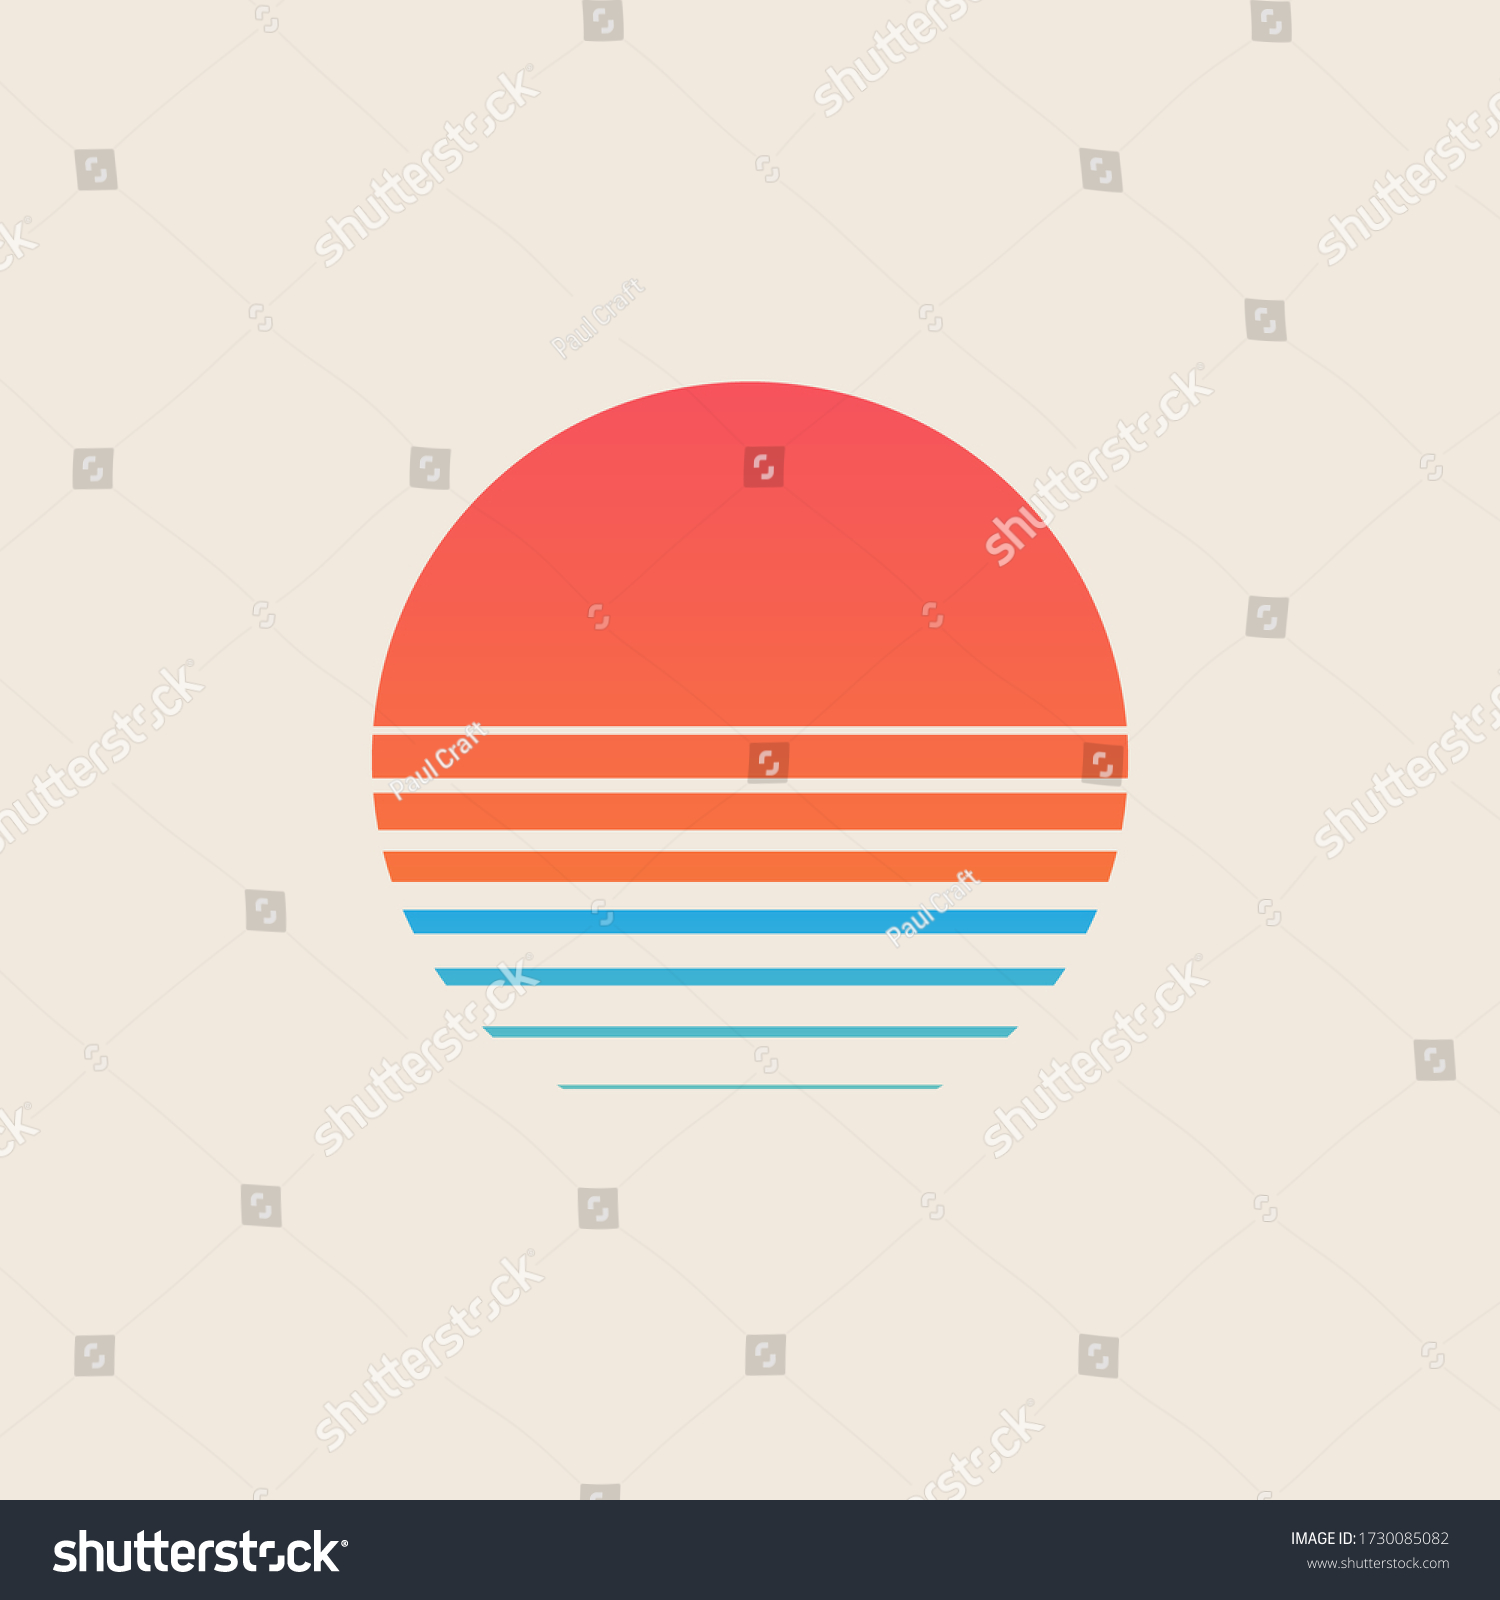 Retro sunset above the sea or ocean with sun and water silhouette. Vintage styled summer logo or icon design isolated on white background. Vector illustration. #1730085082